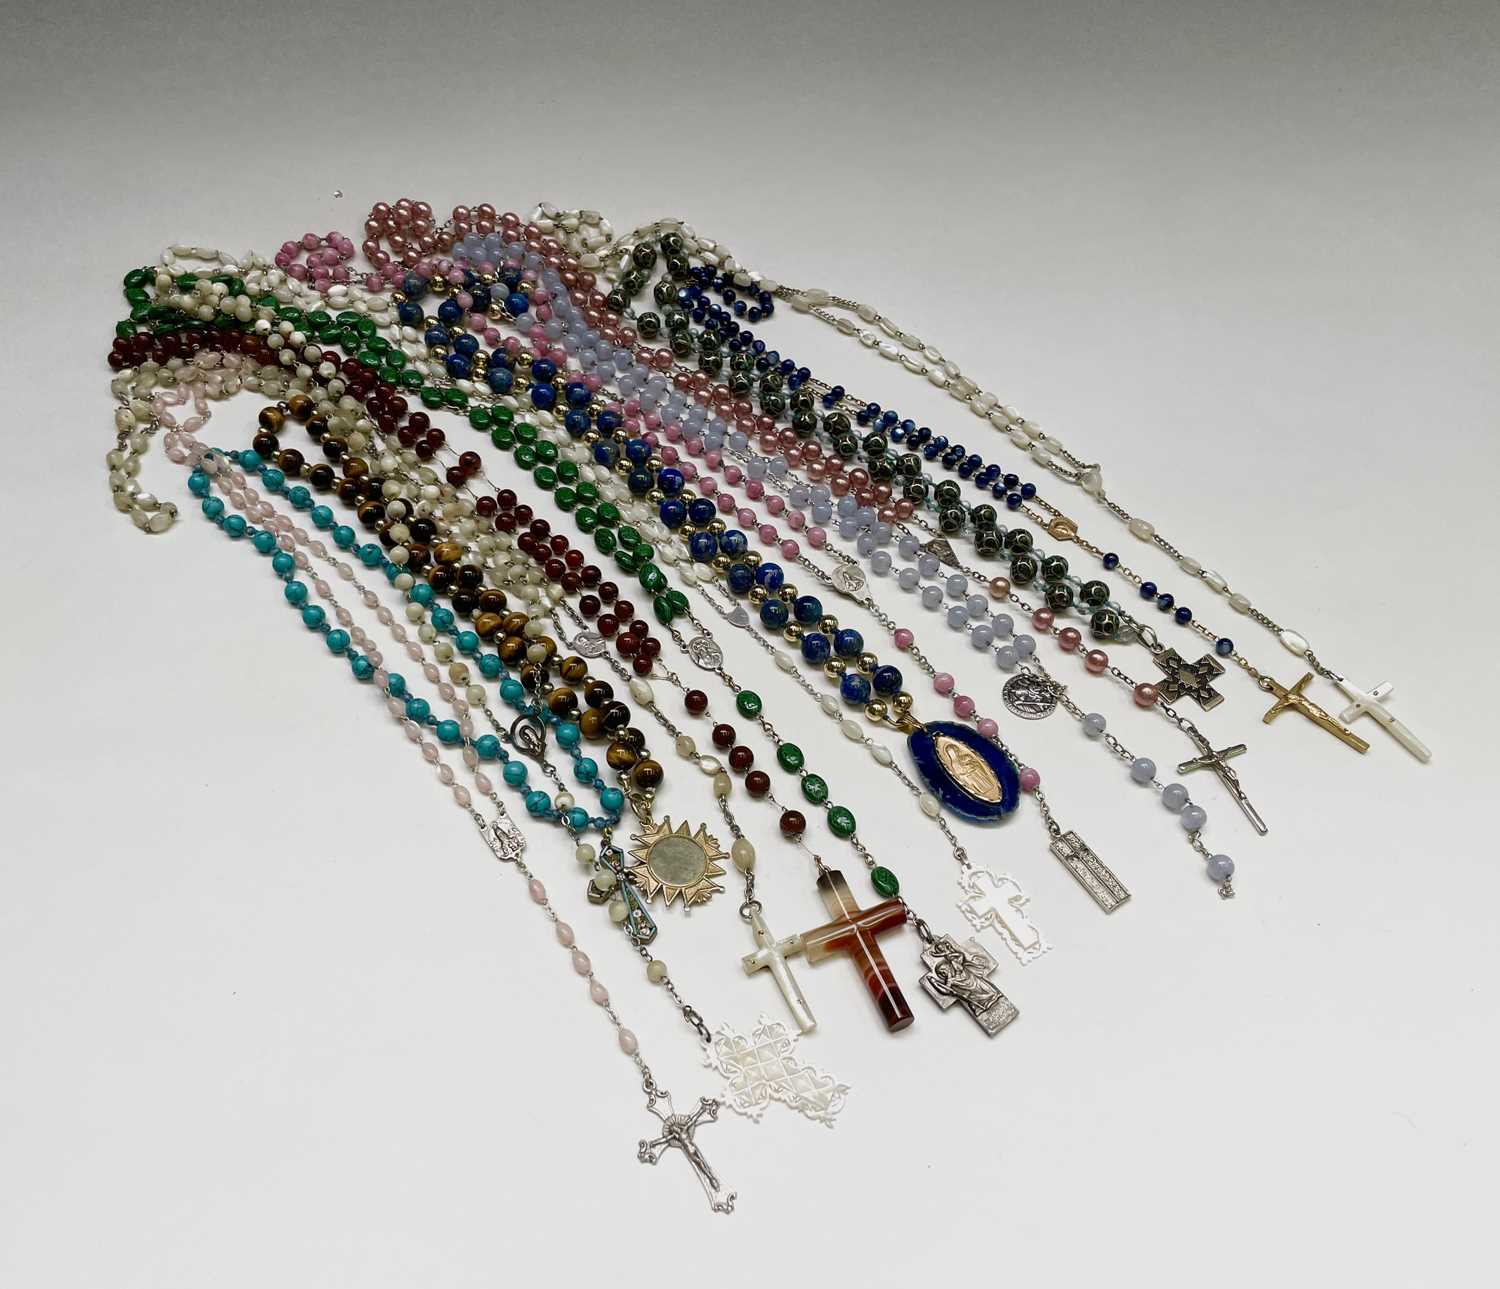 Fifteen rosary bead necklaces, all with unique decorative crosses.